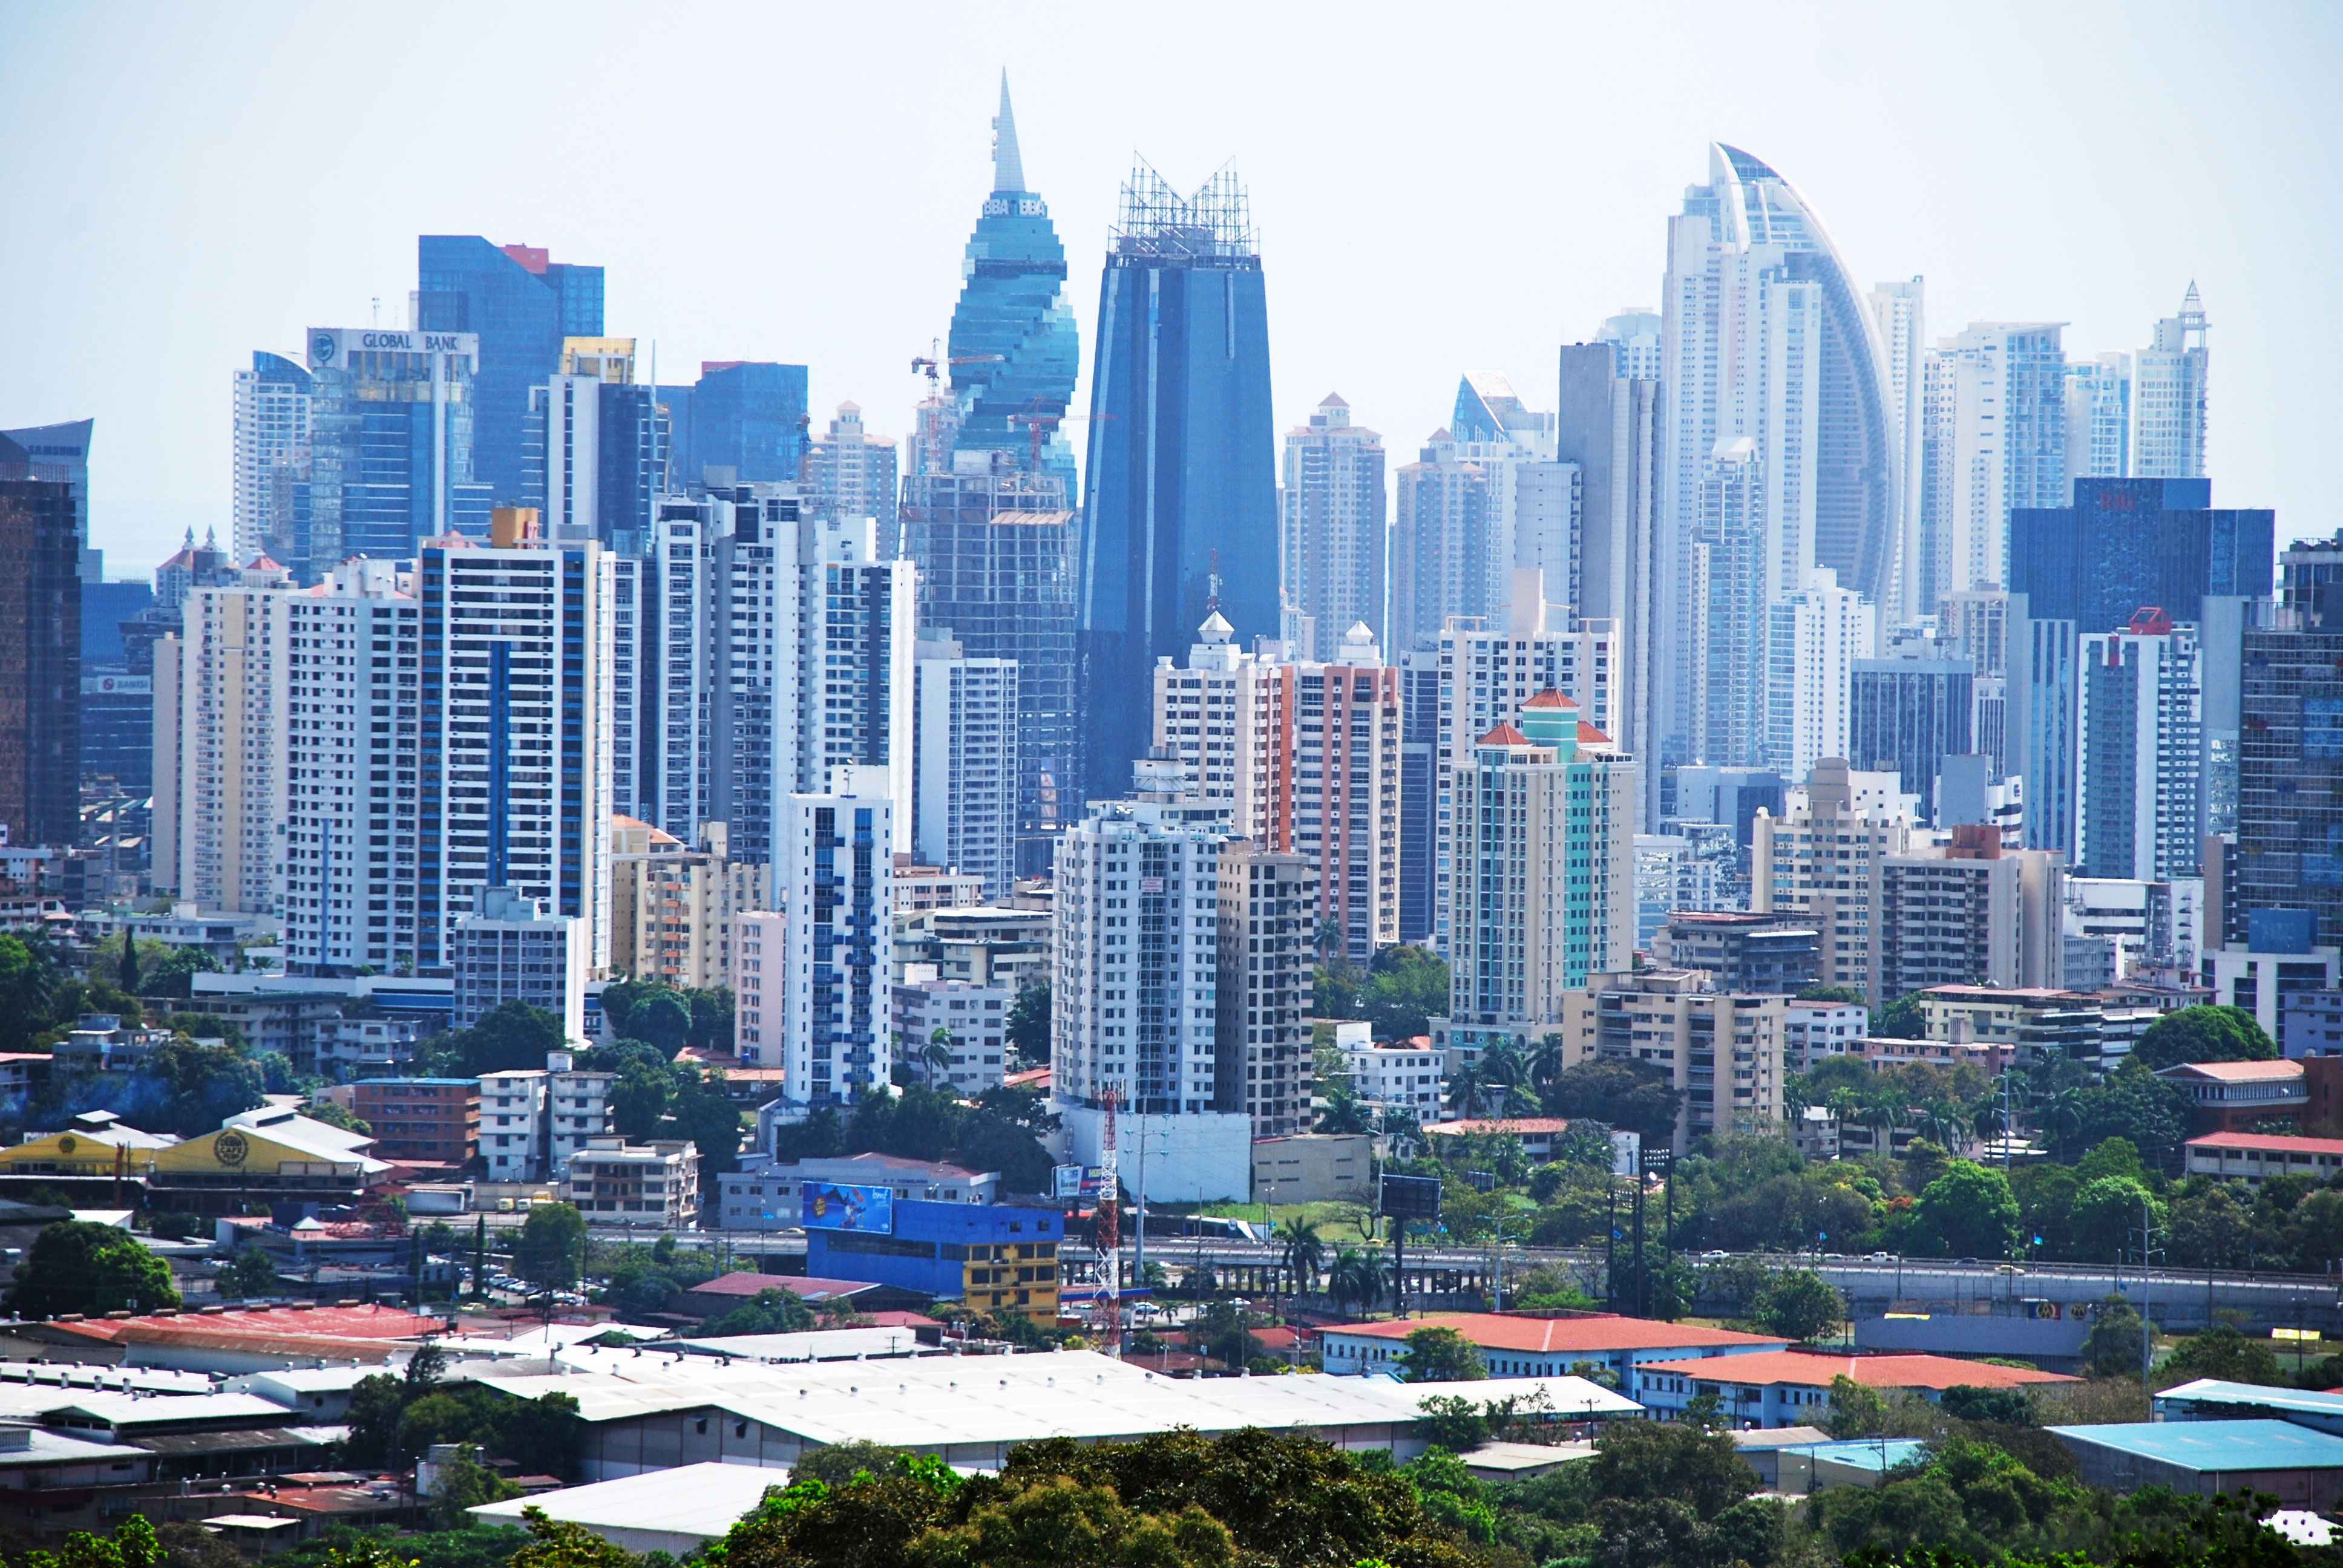 Panama City - An Important Gateway between the Pacific and Atlantic